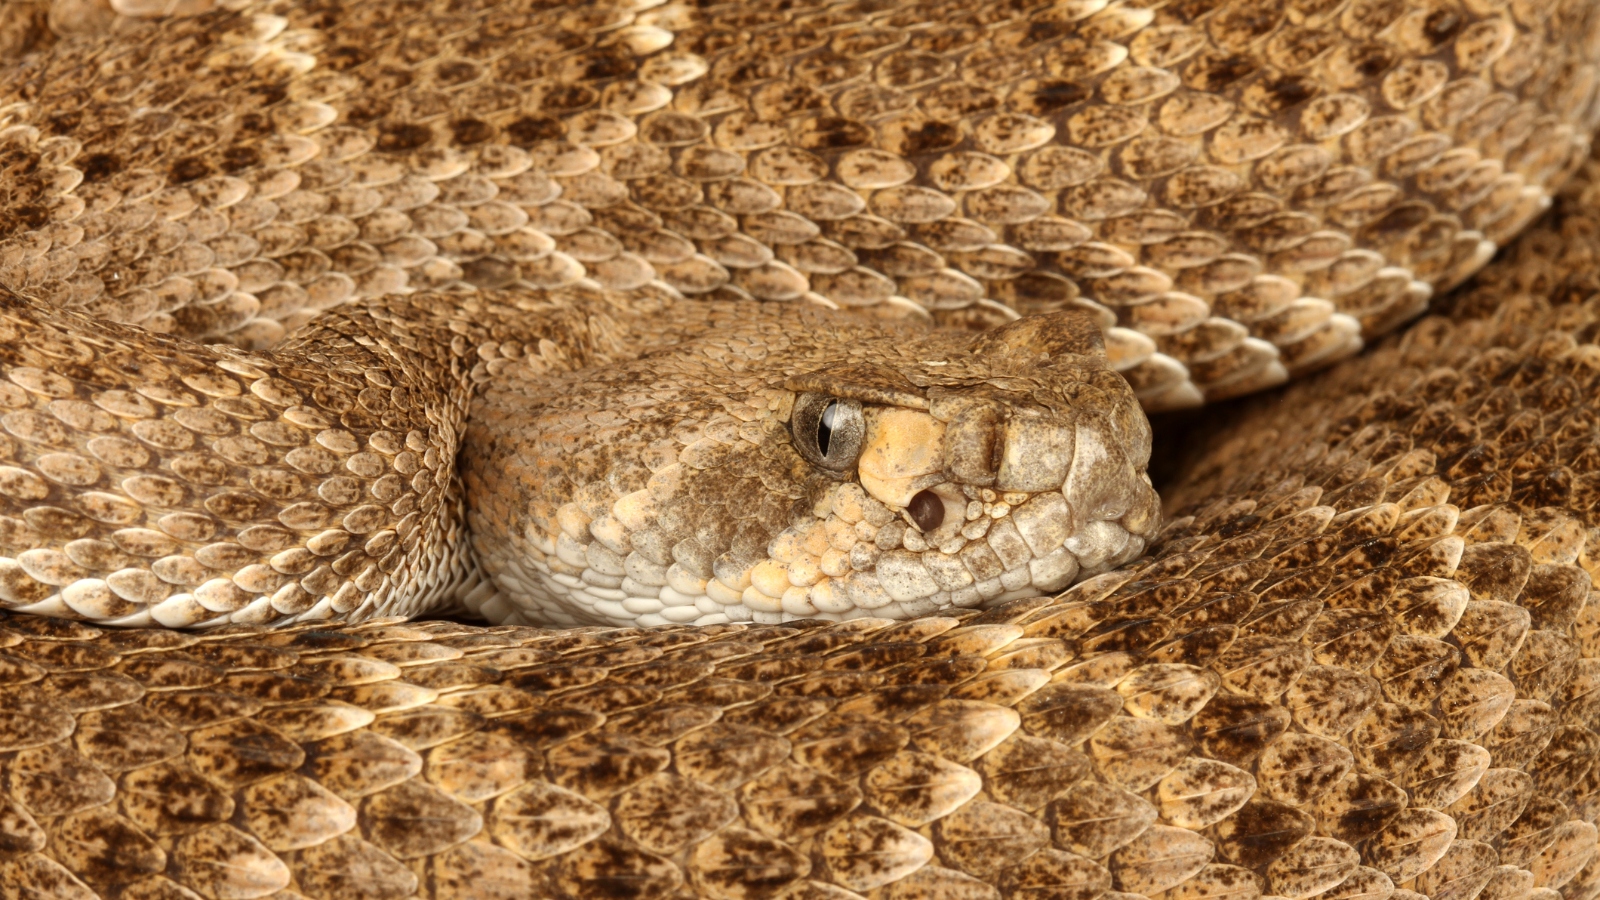 Arizona Driver Finds Rattlesnake In Backseat, Learns How To Deal